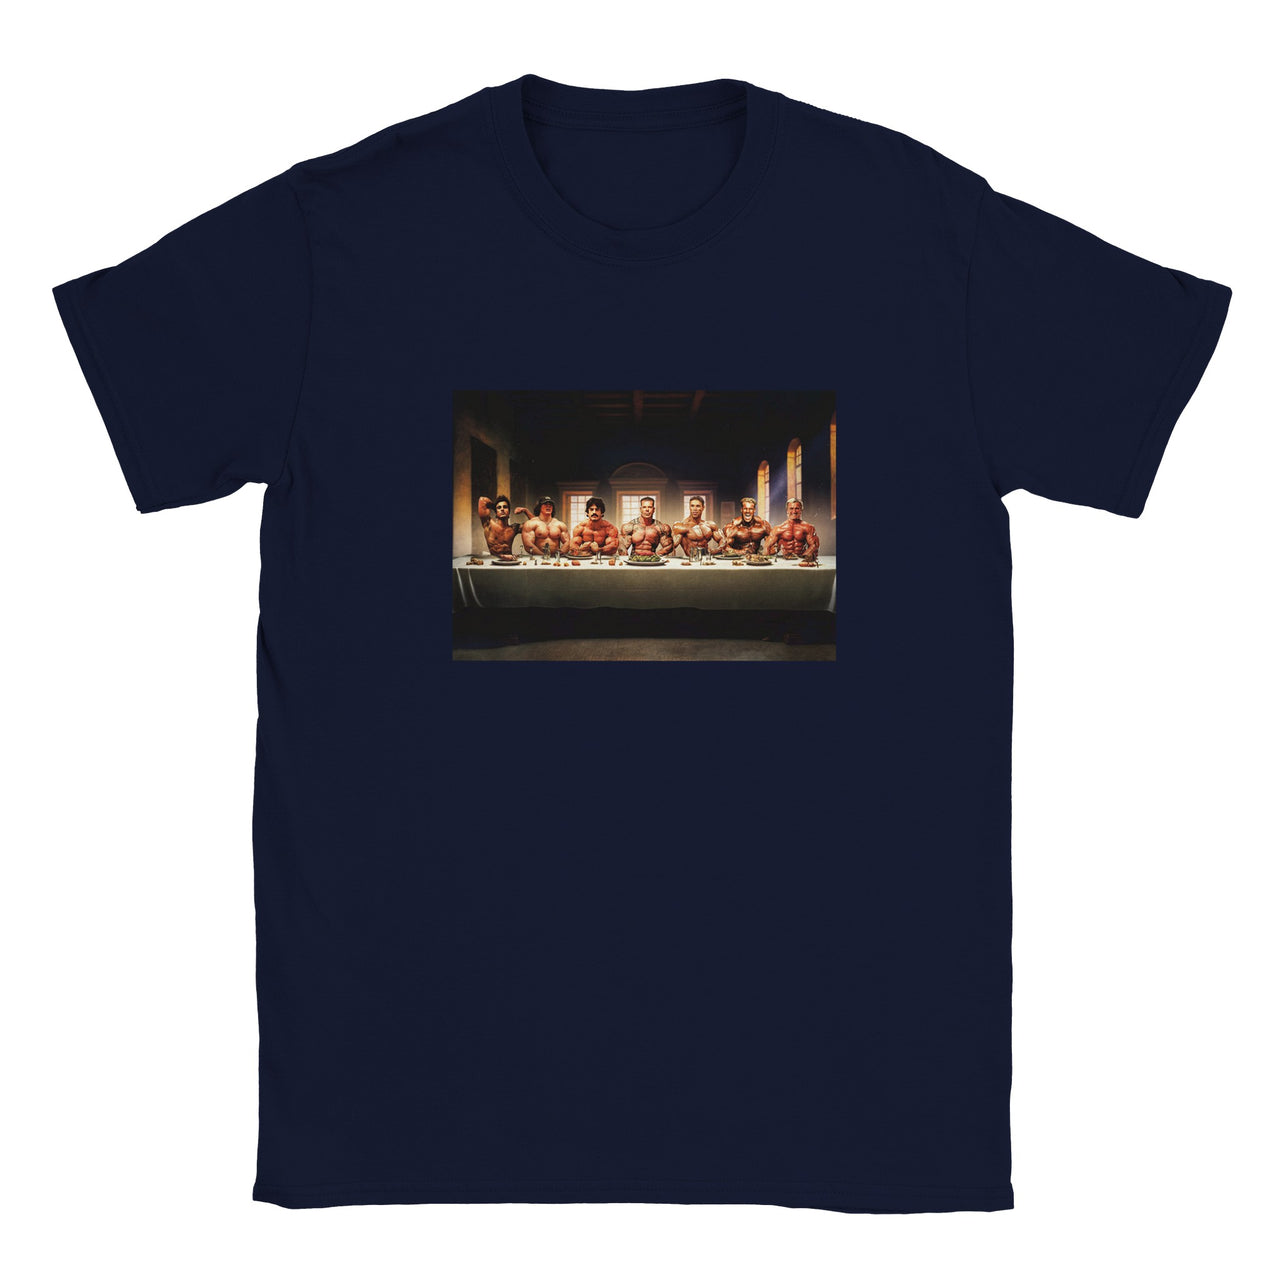 The Most Real Last Supper T-shirt